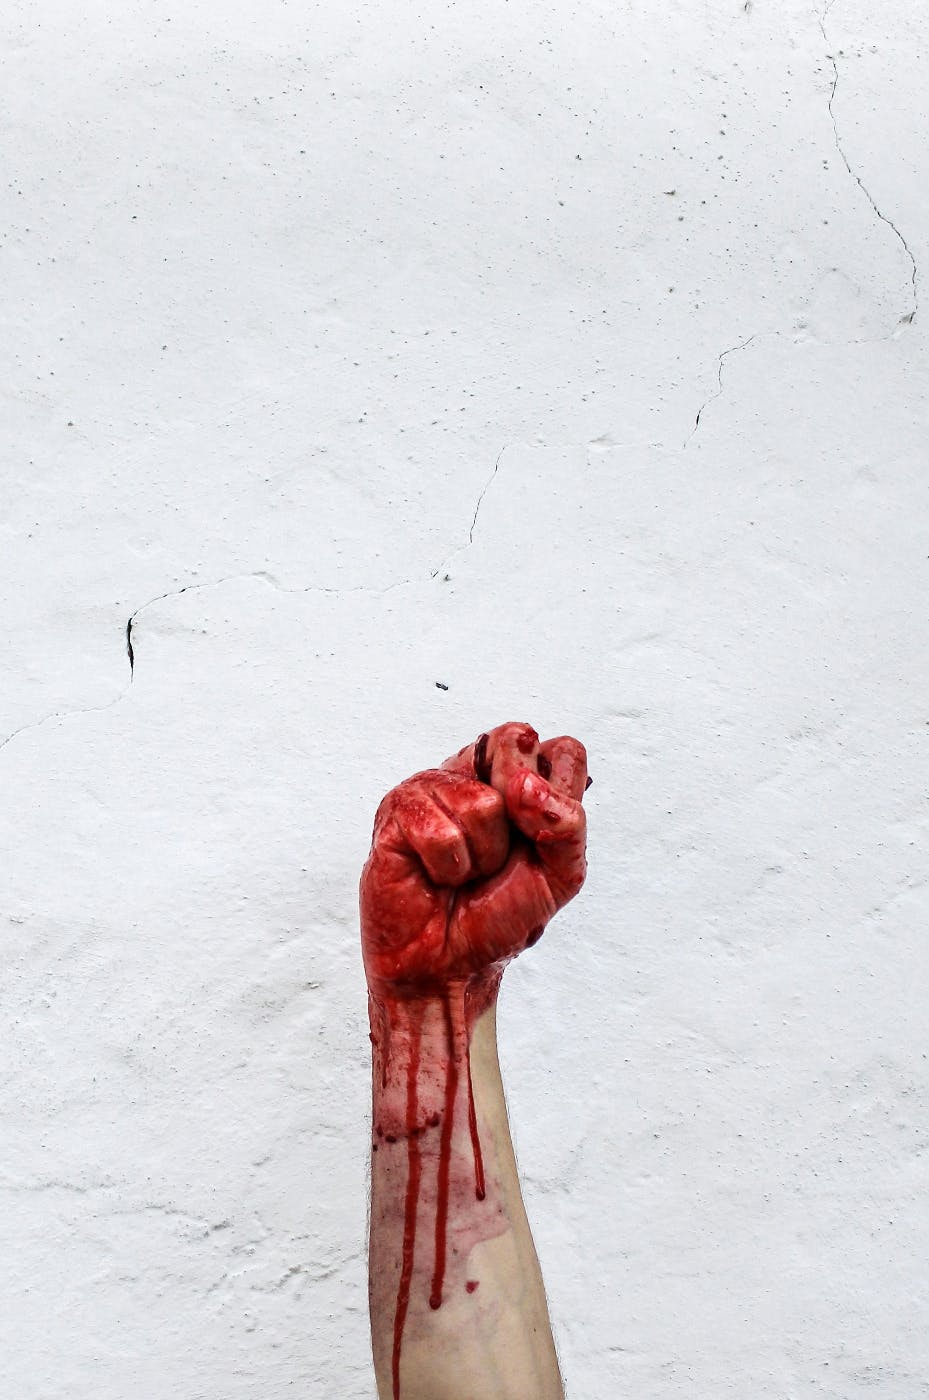 A fisted hand covered in blood raised against a white wall